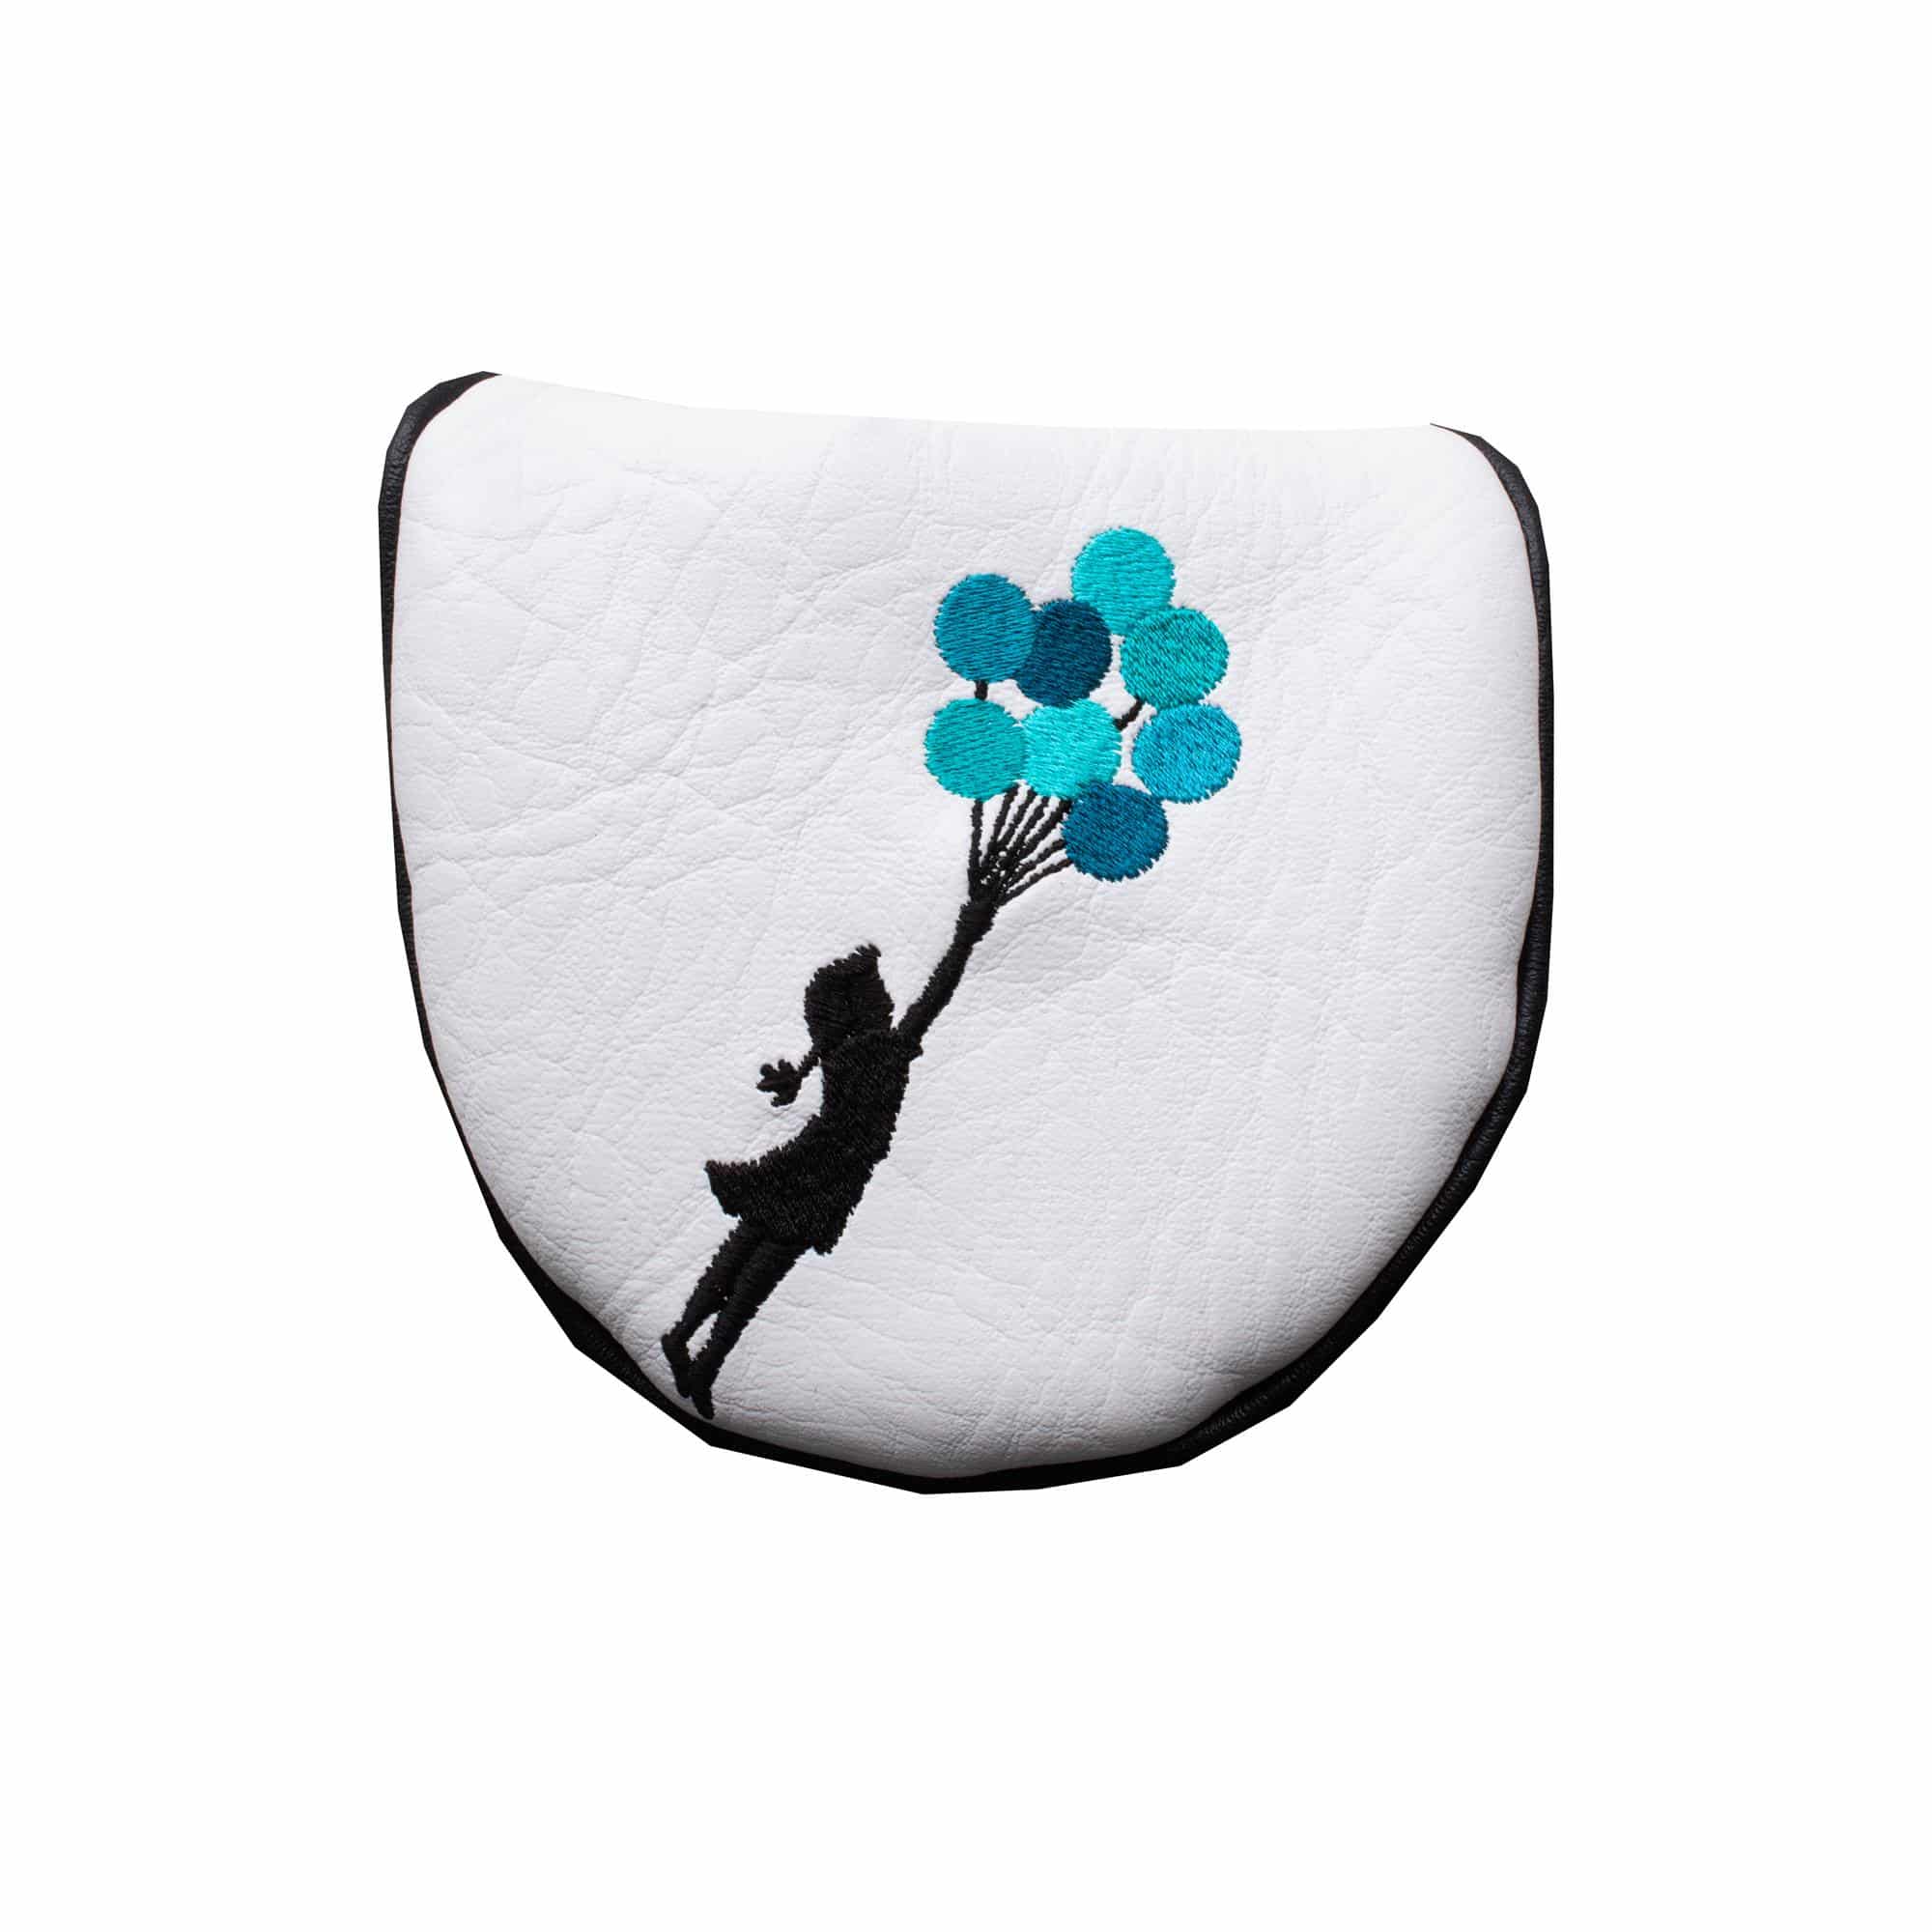 GRADIENT CIRCLE G'S VELOUR-LINED BLADE PUTTER COVER, GOLF HEAD COVERS &  ACCESSORIES FOR MEN AND WOMEN